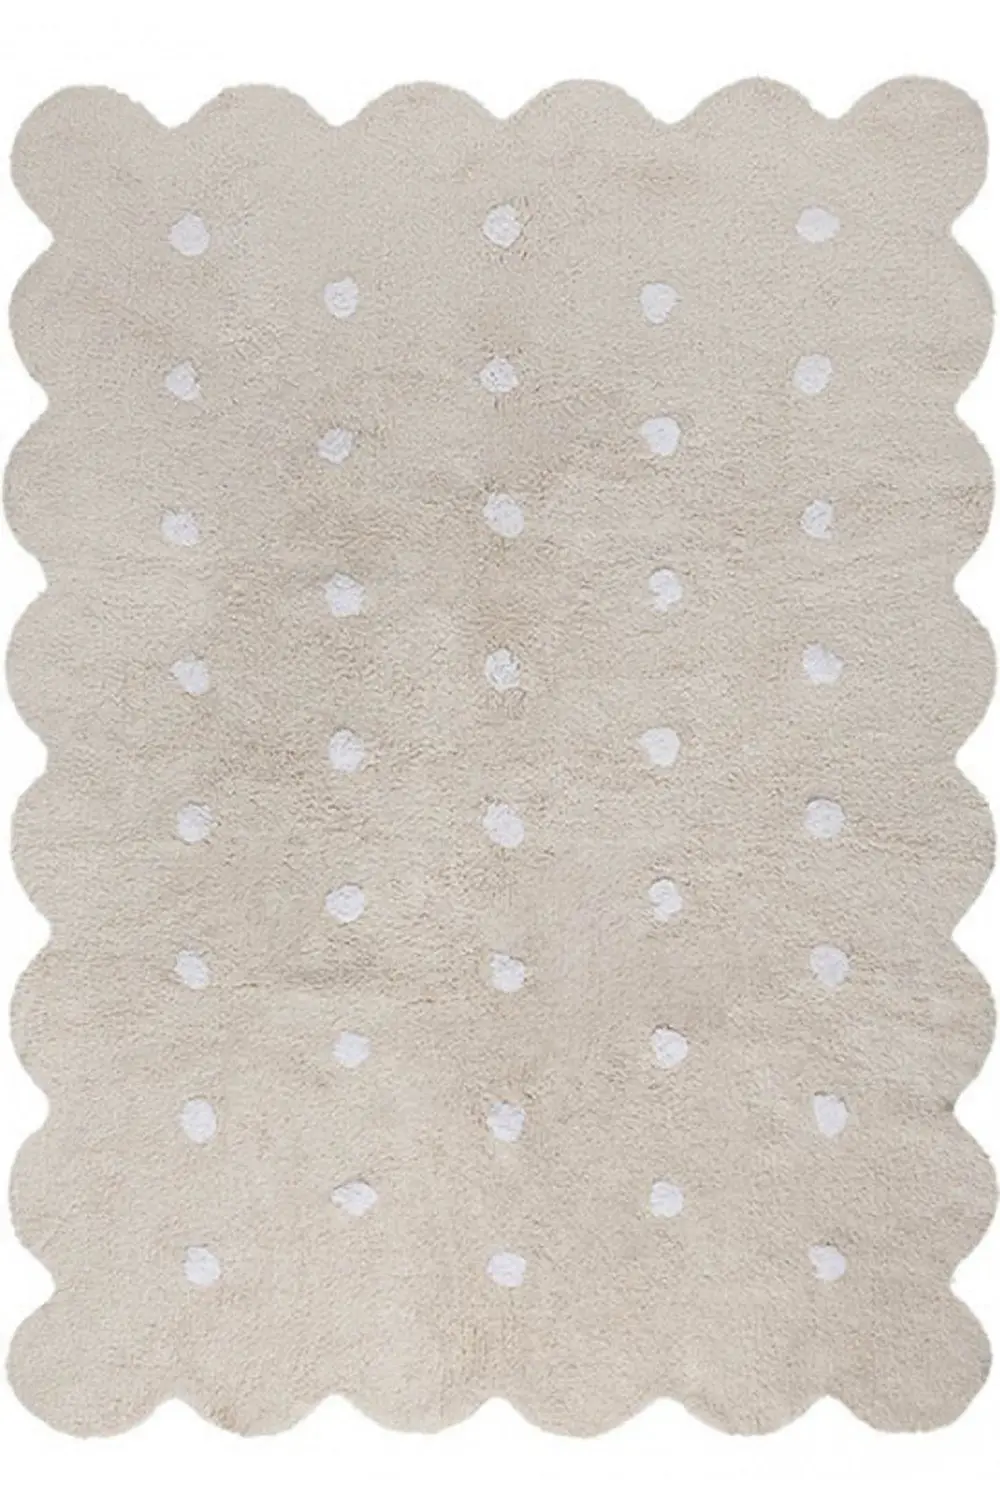 C-77778 4 x 5 Small Biscuit Beige Washable Rug-1